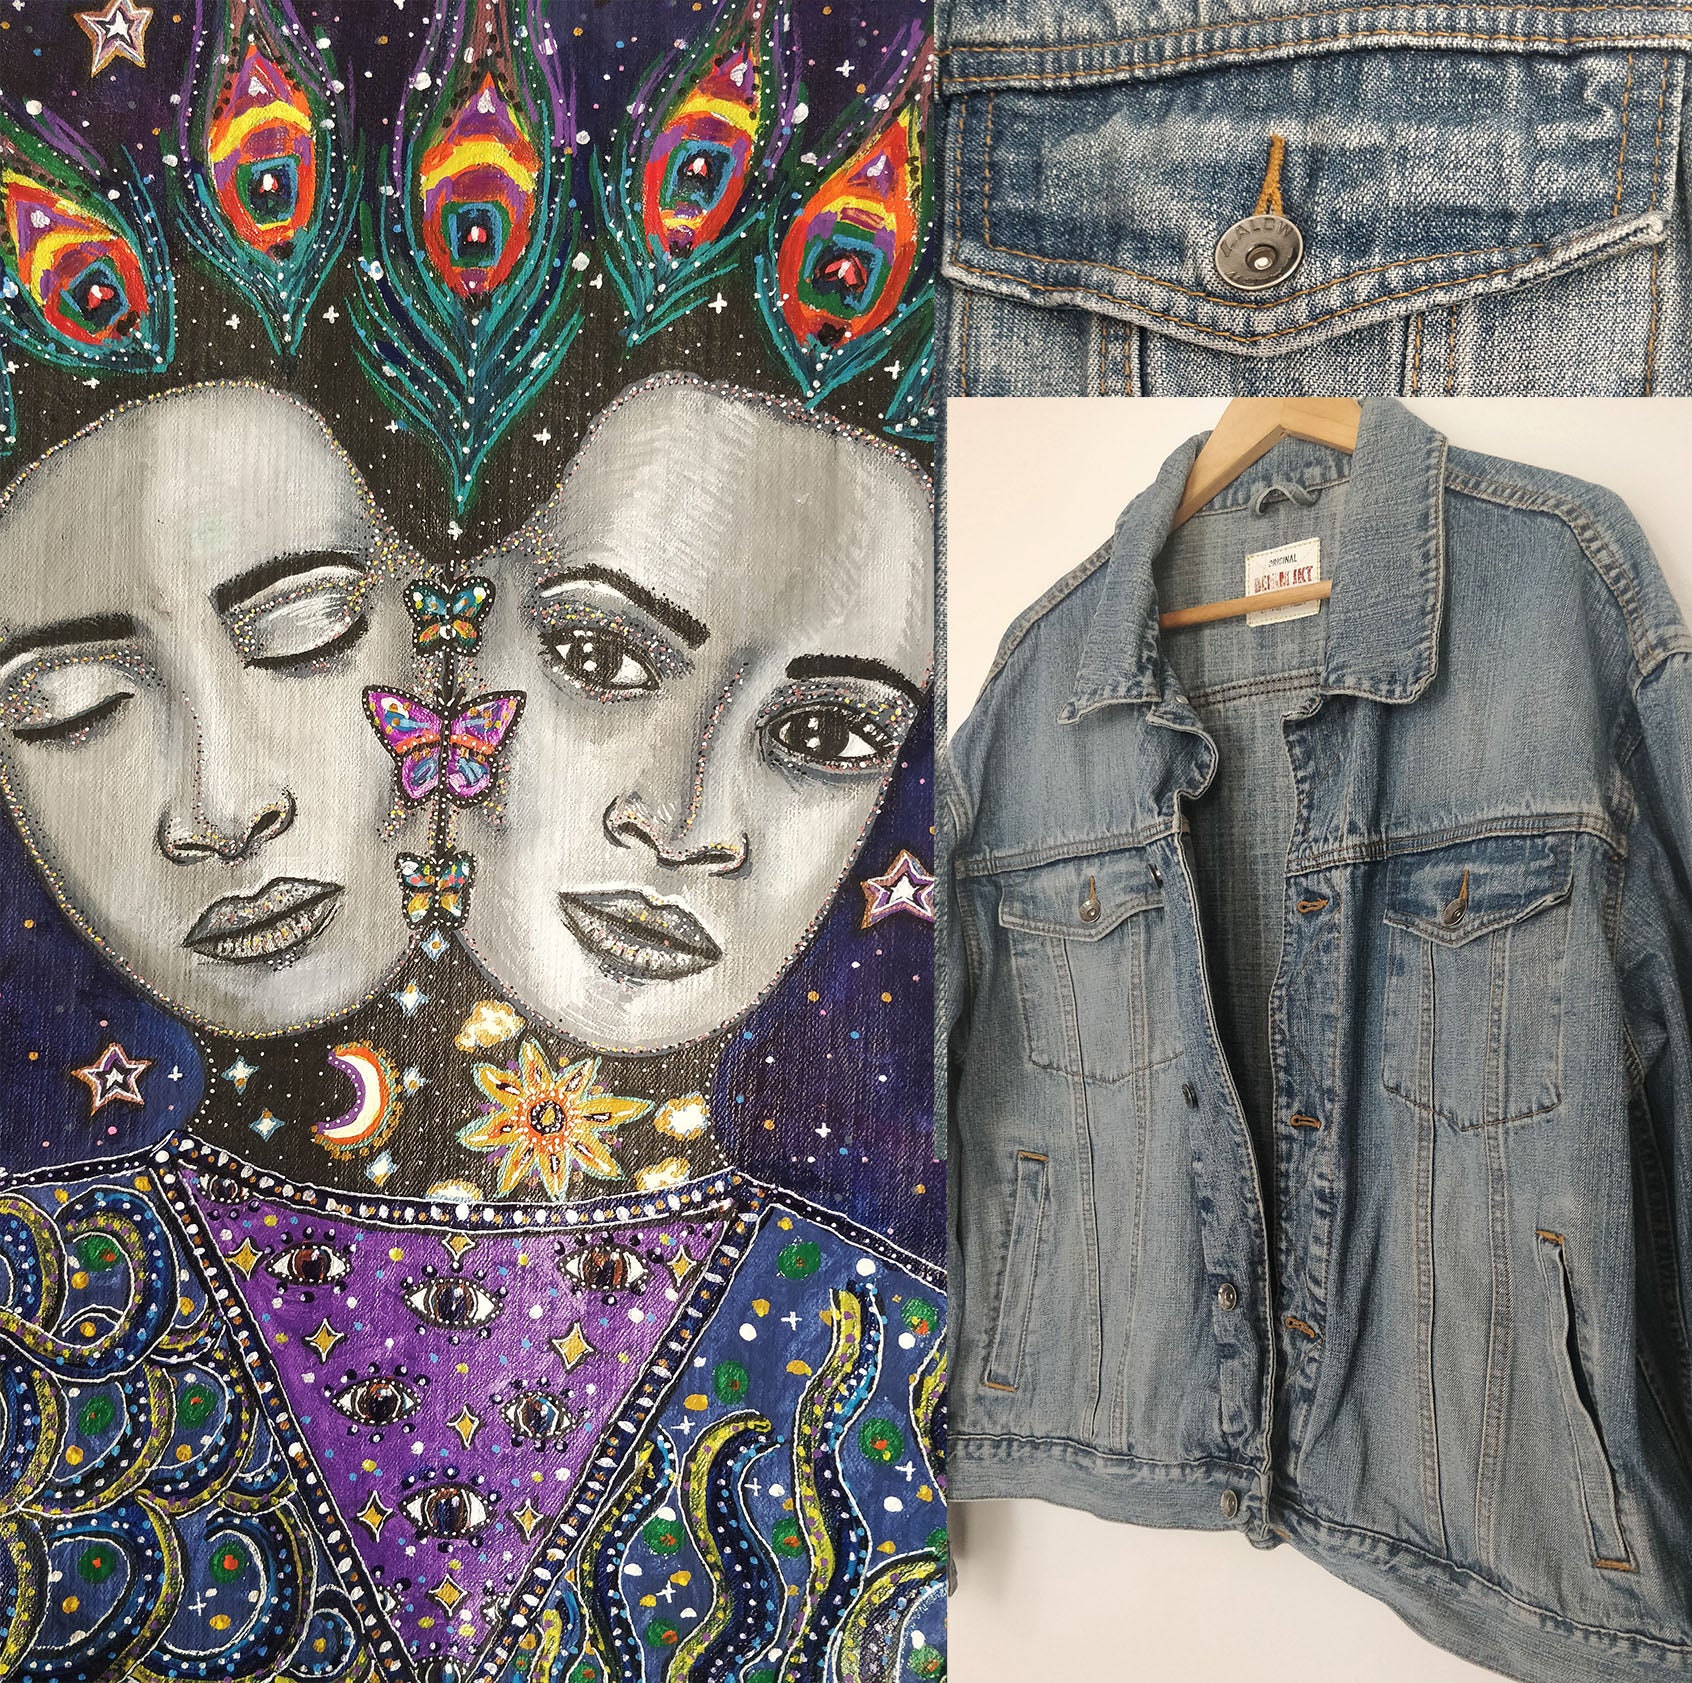 Gemini Hand Painted One Of A Kind M Denim Jacket